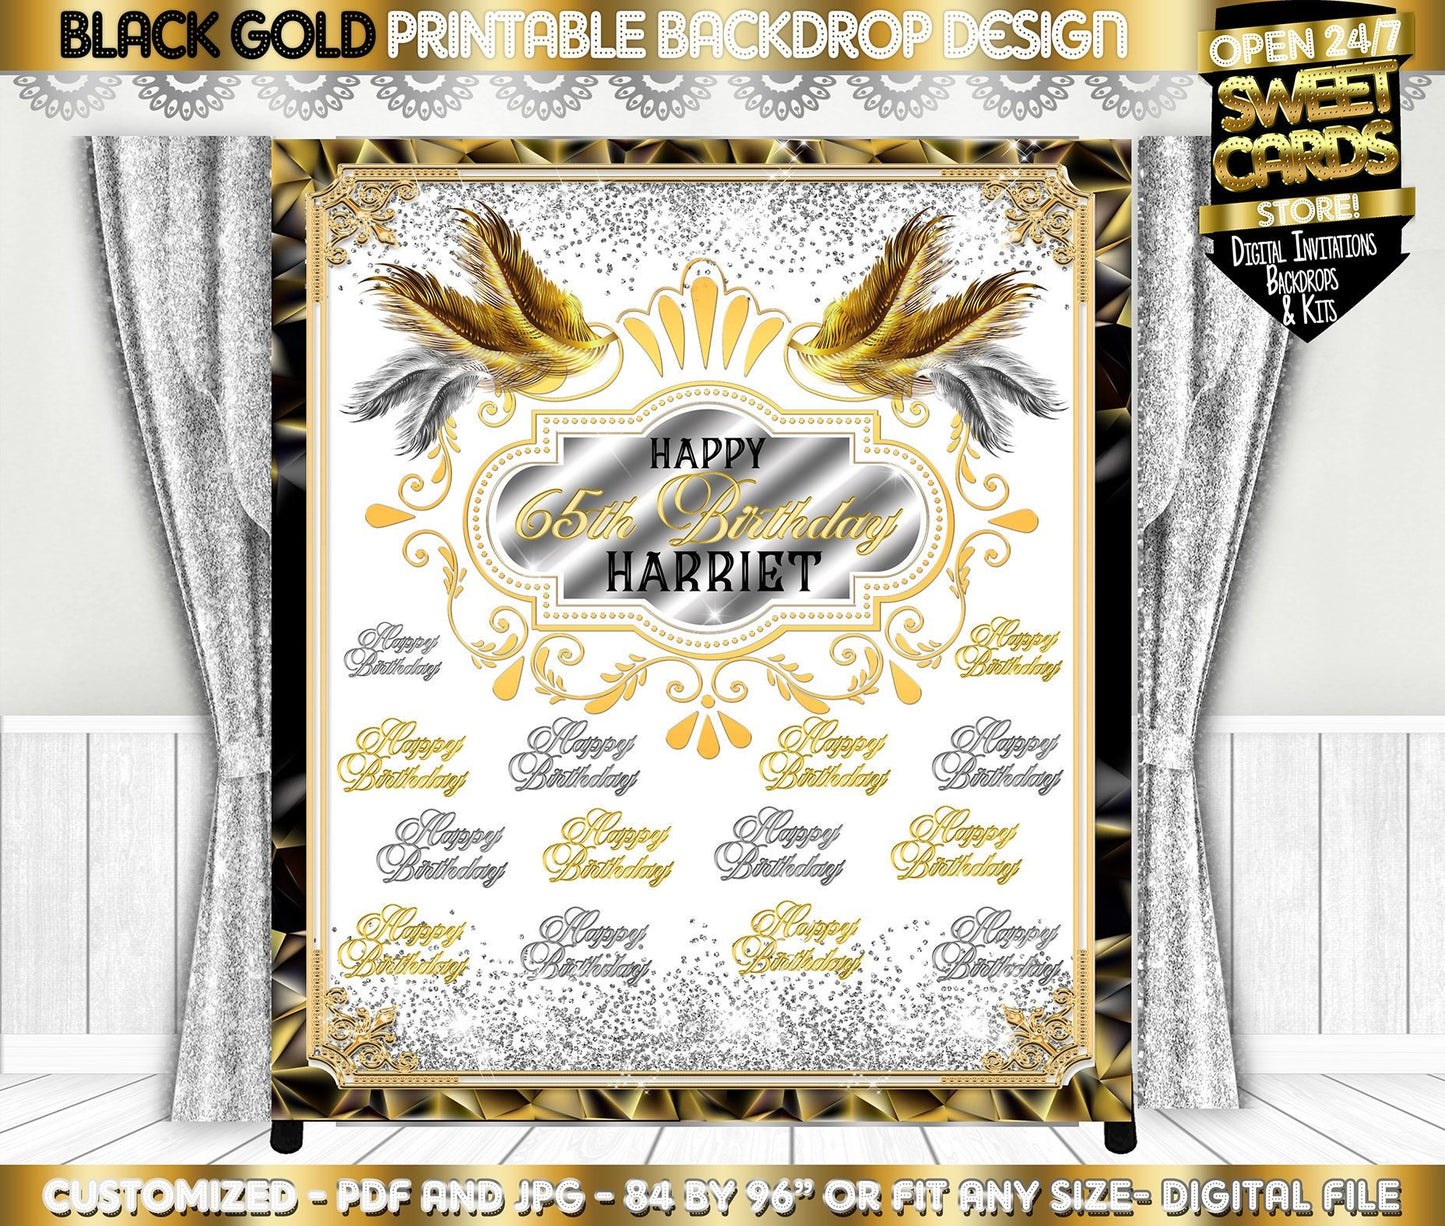 65th Birthday Printable Backdrop Ste and Repeat, Step and Repeat Anniversary backdrop, 50th 60th 40th Backdrop, White gold silver backdrop